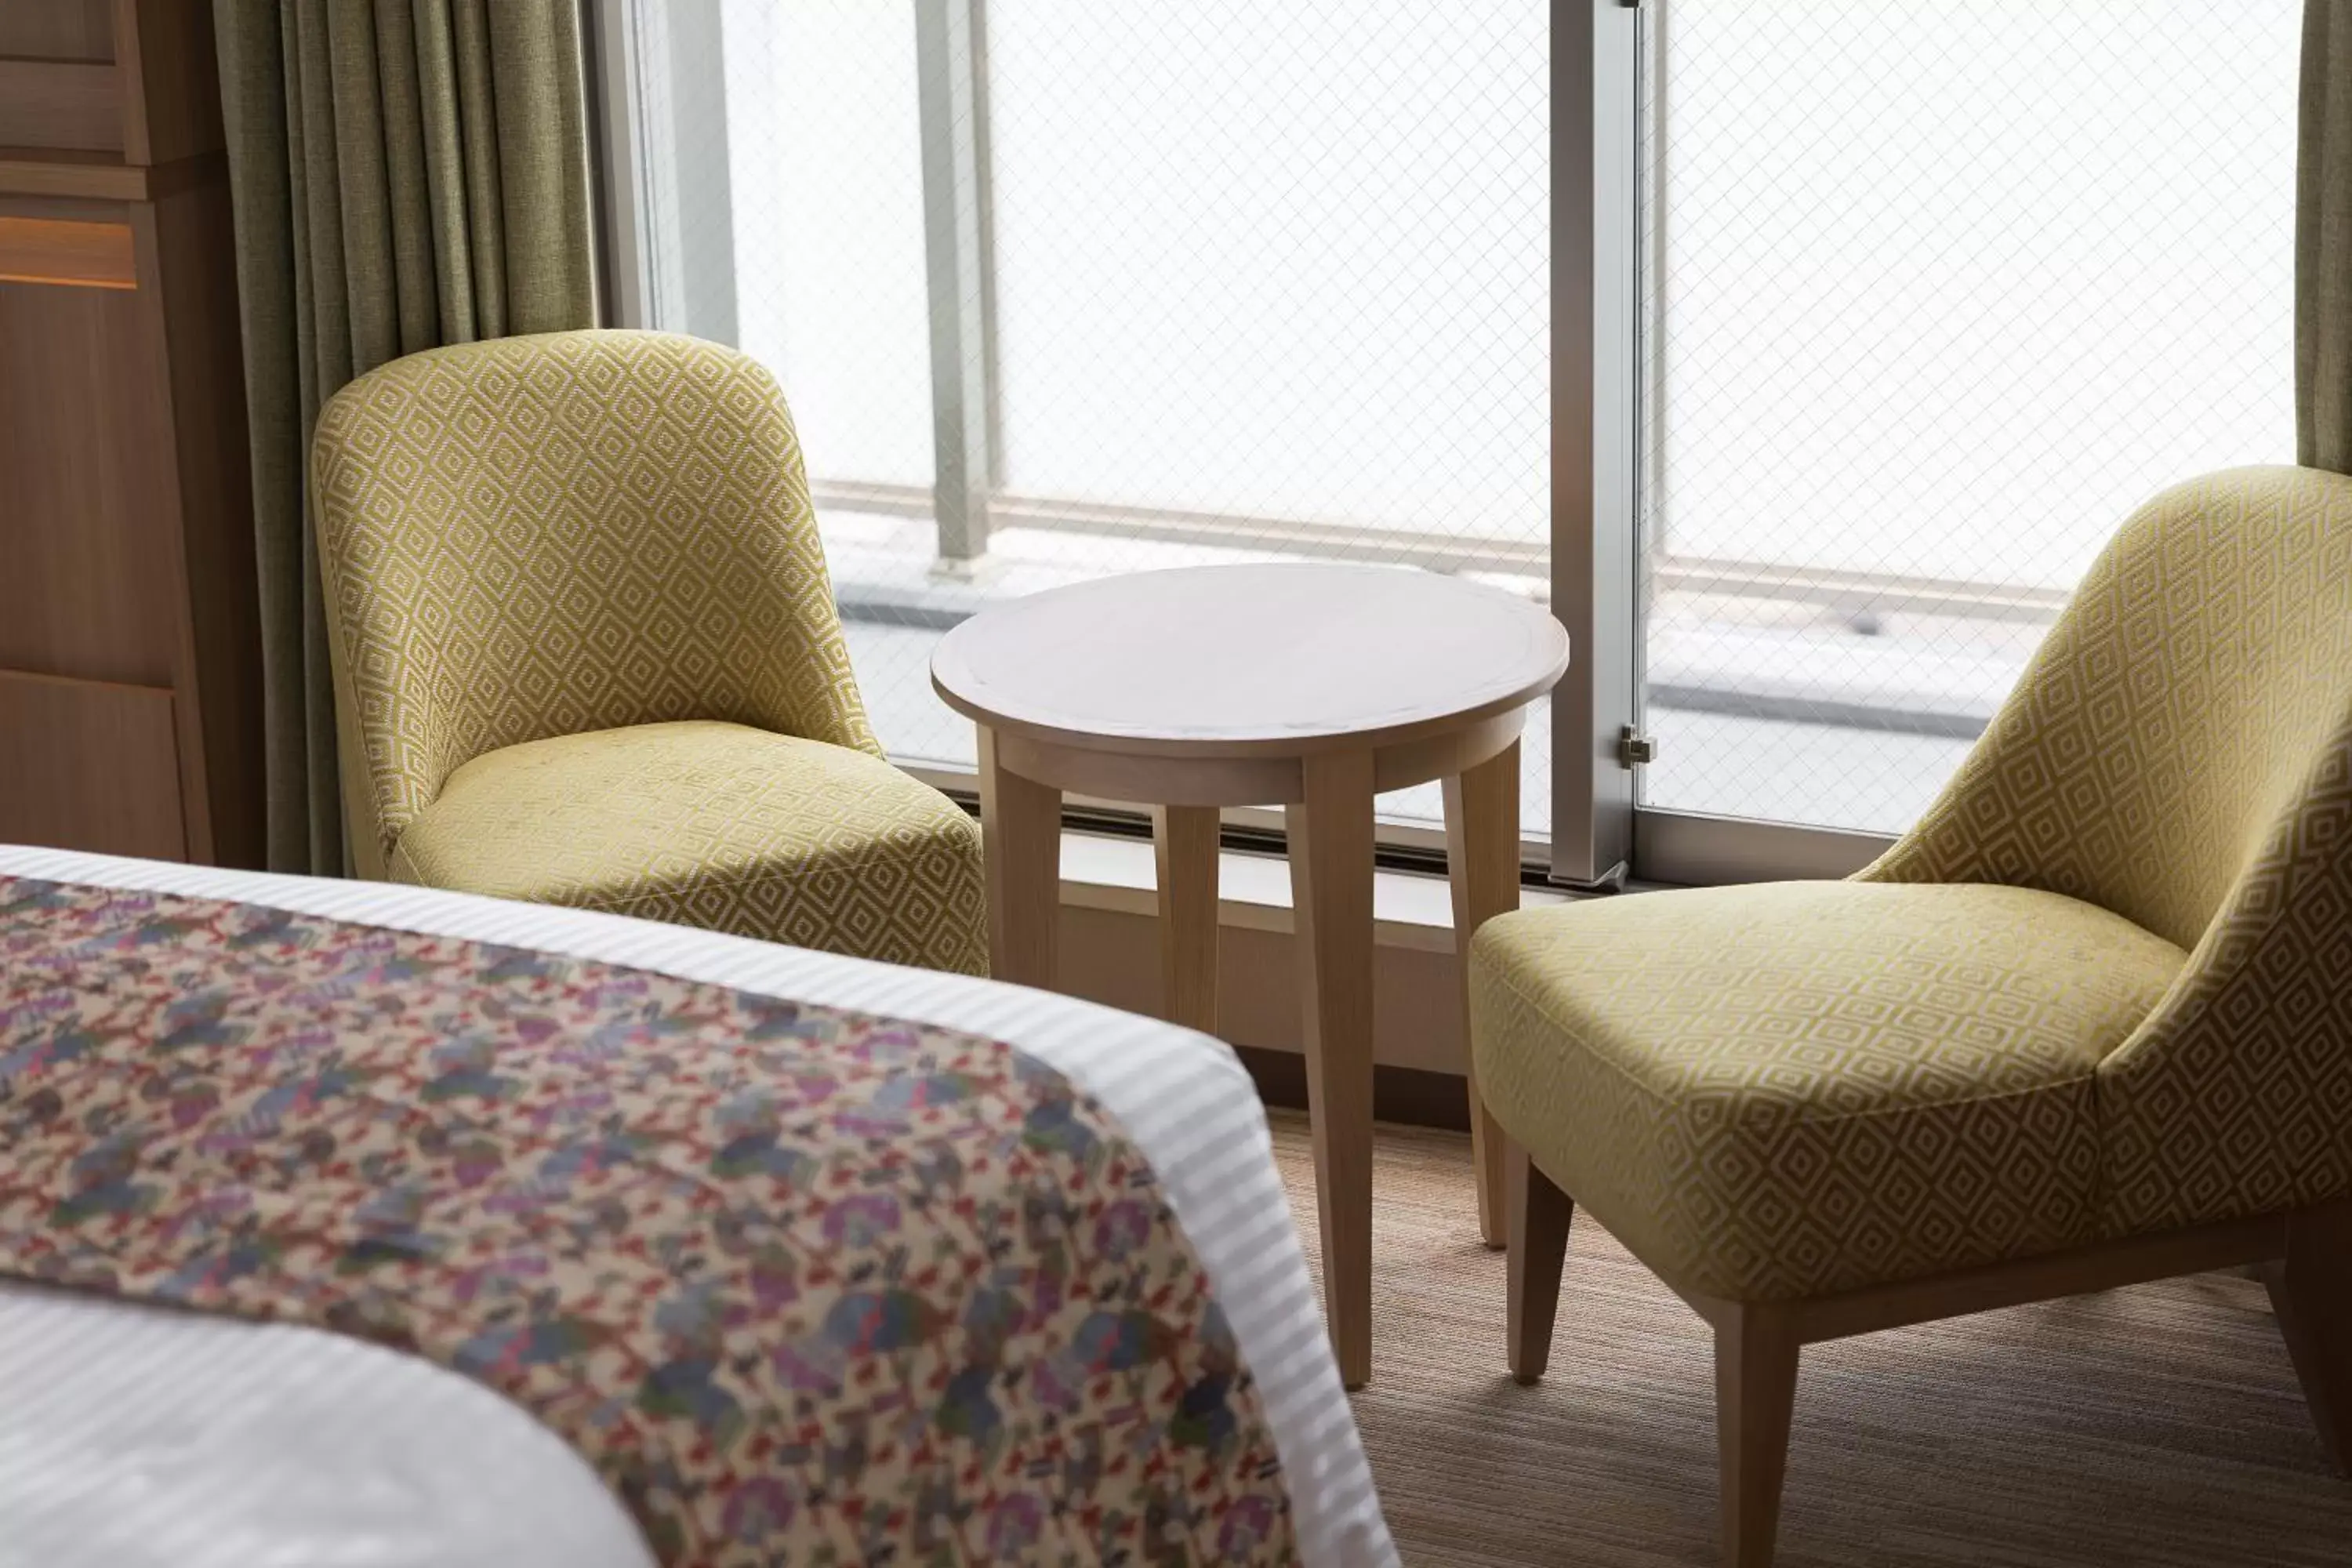 Decorative detail, Seating Area in HOTEL MYSTAYS Kyoto Shijo